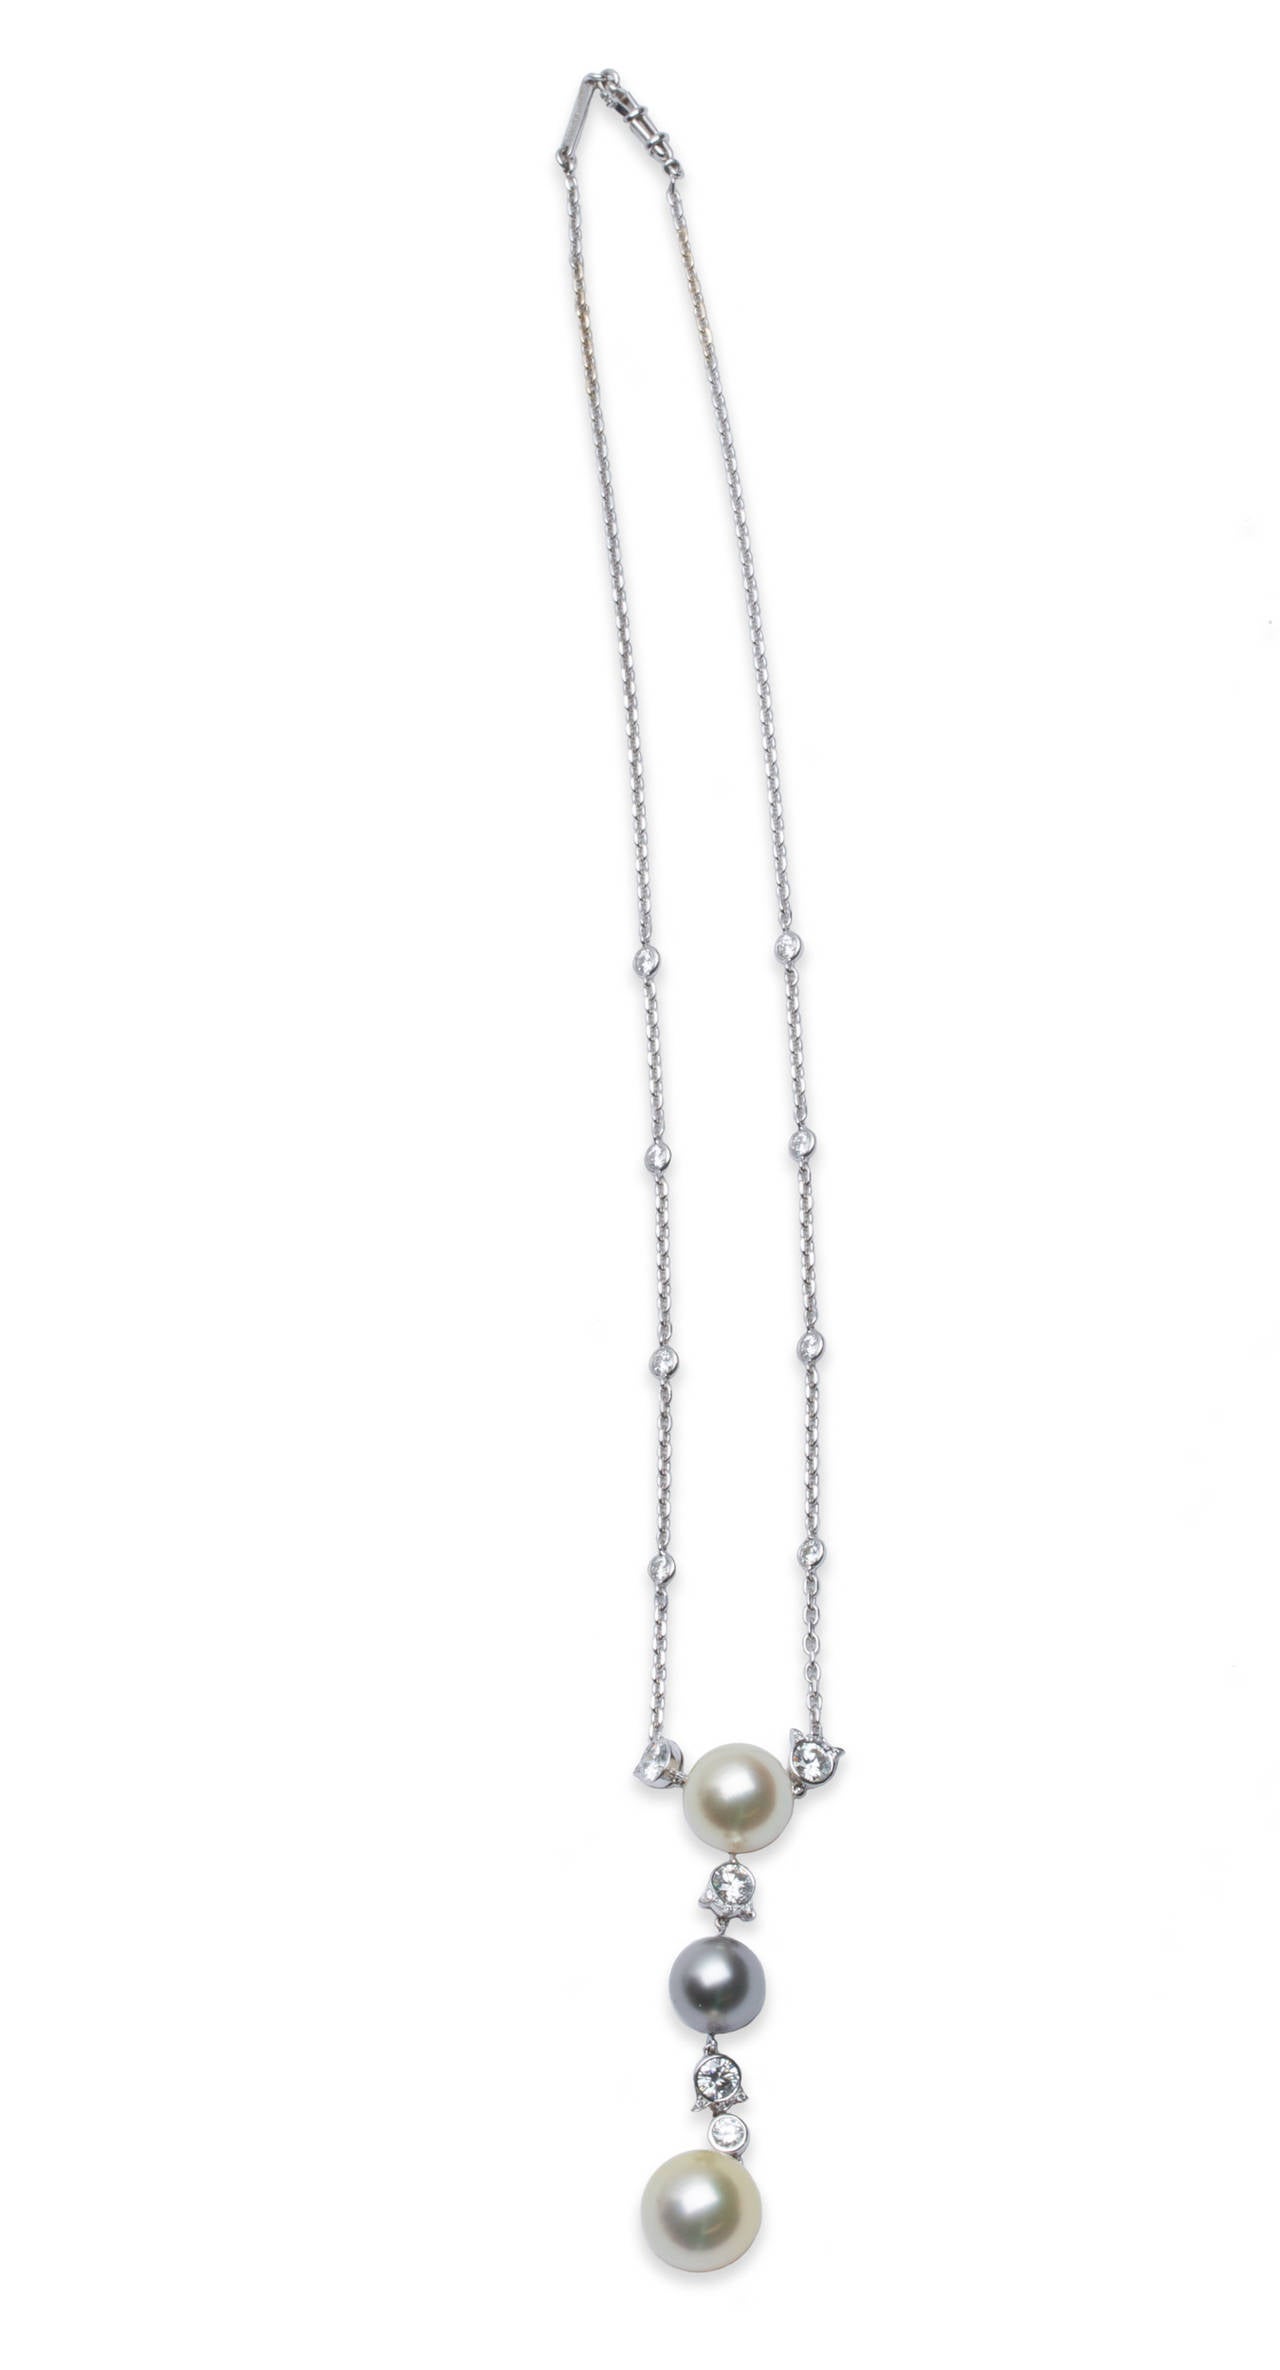 Cartier Himalia 18K White Gold Pearl and Diamond Necklace, Total Diamond Weight 2.20ct. , Pearls 10.50mm to 12.50mm. Necklace length 17